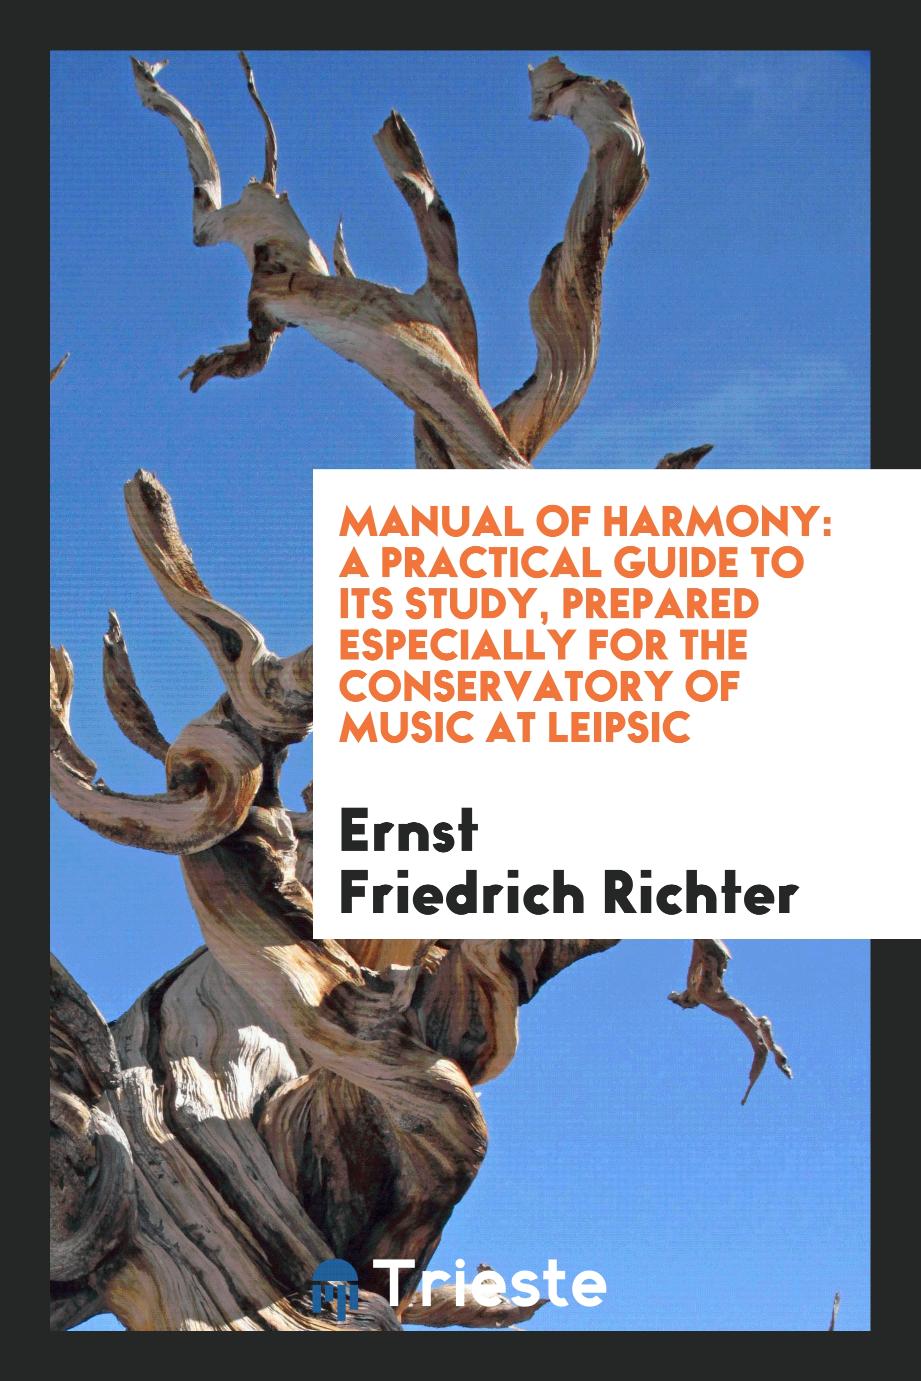 Manual of harmony: a practical guide to its study, prepared especially for the Conservatory of Music at Leipsic